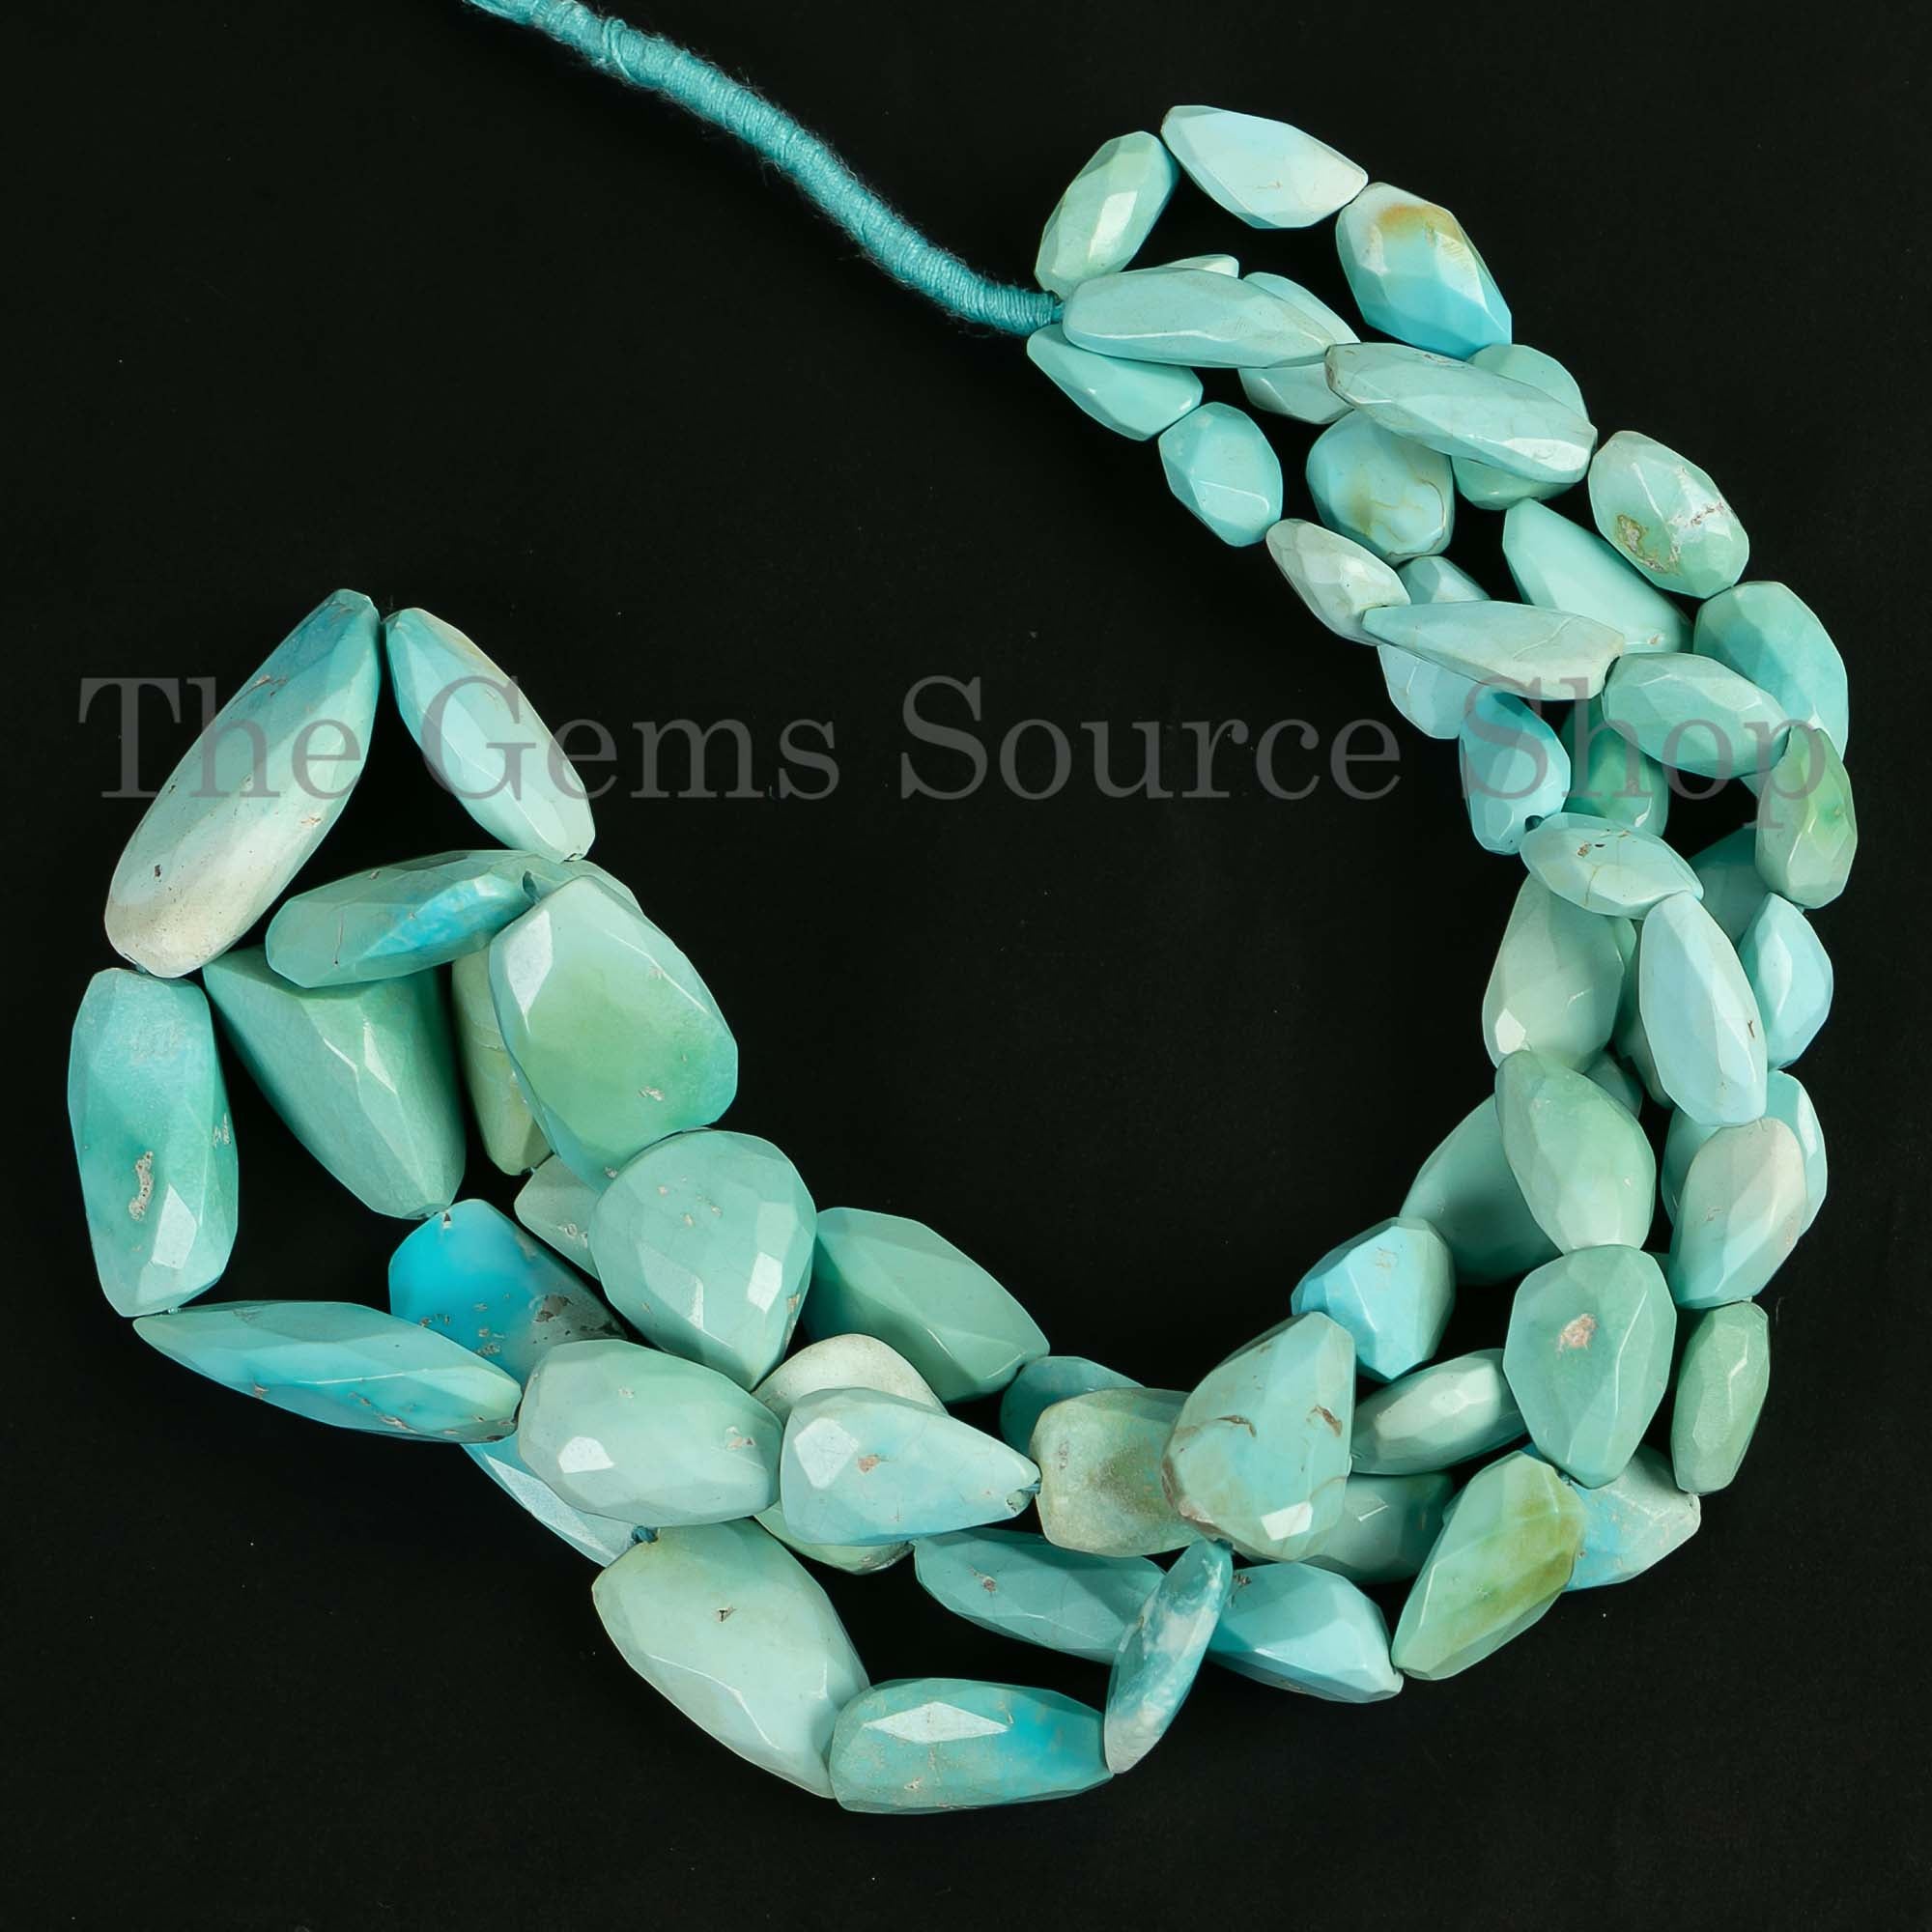 Natural Sleeping Beauty Turquoise Beads, Turquoise Briolette Tumbles, Loose Fancy Turquoise Nuggets